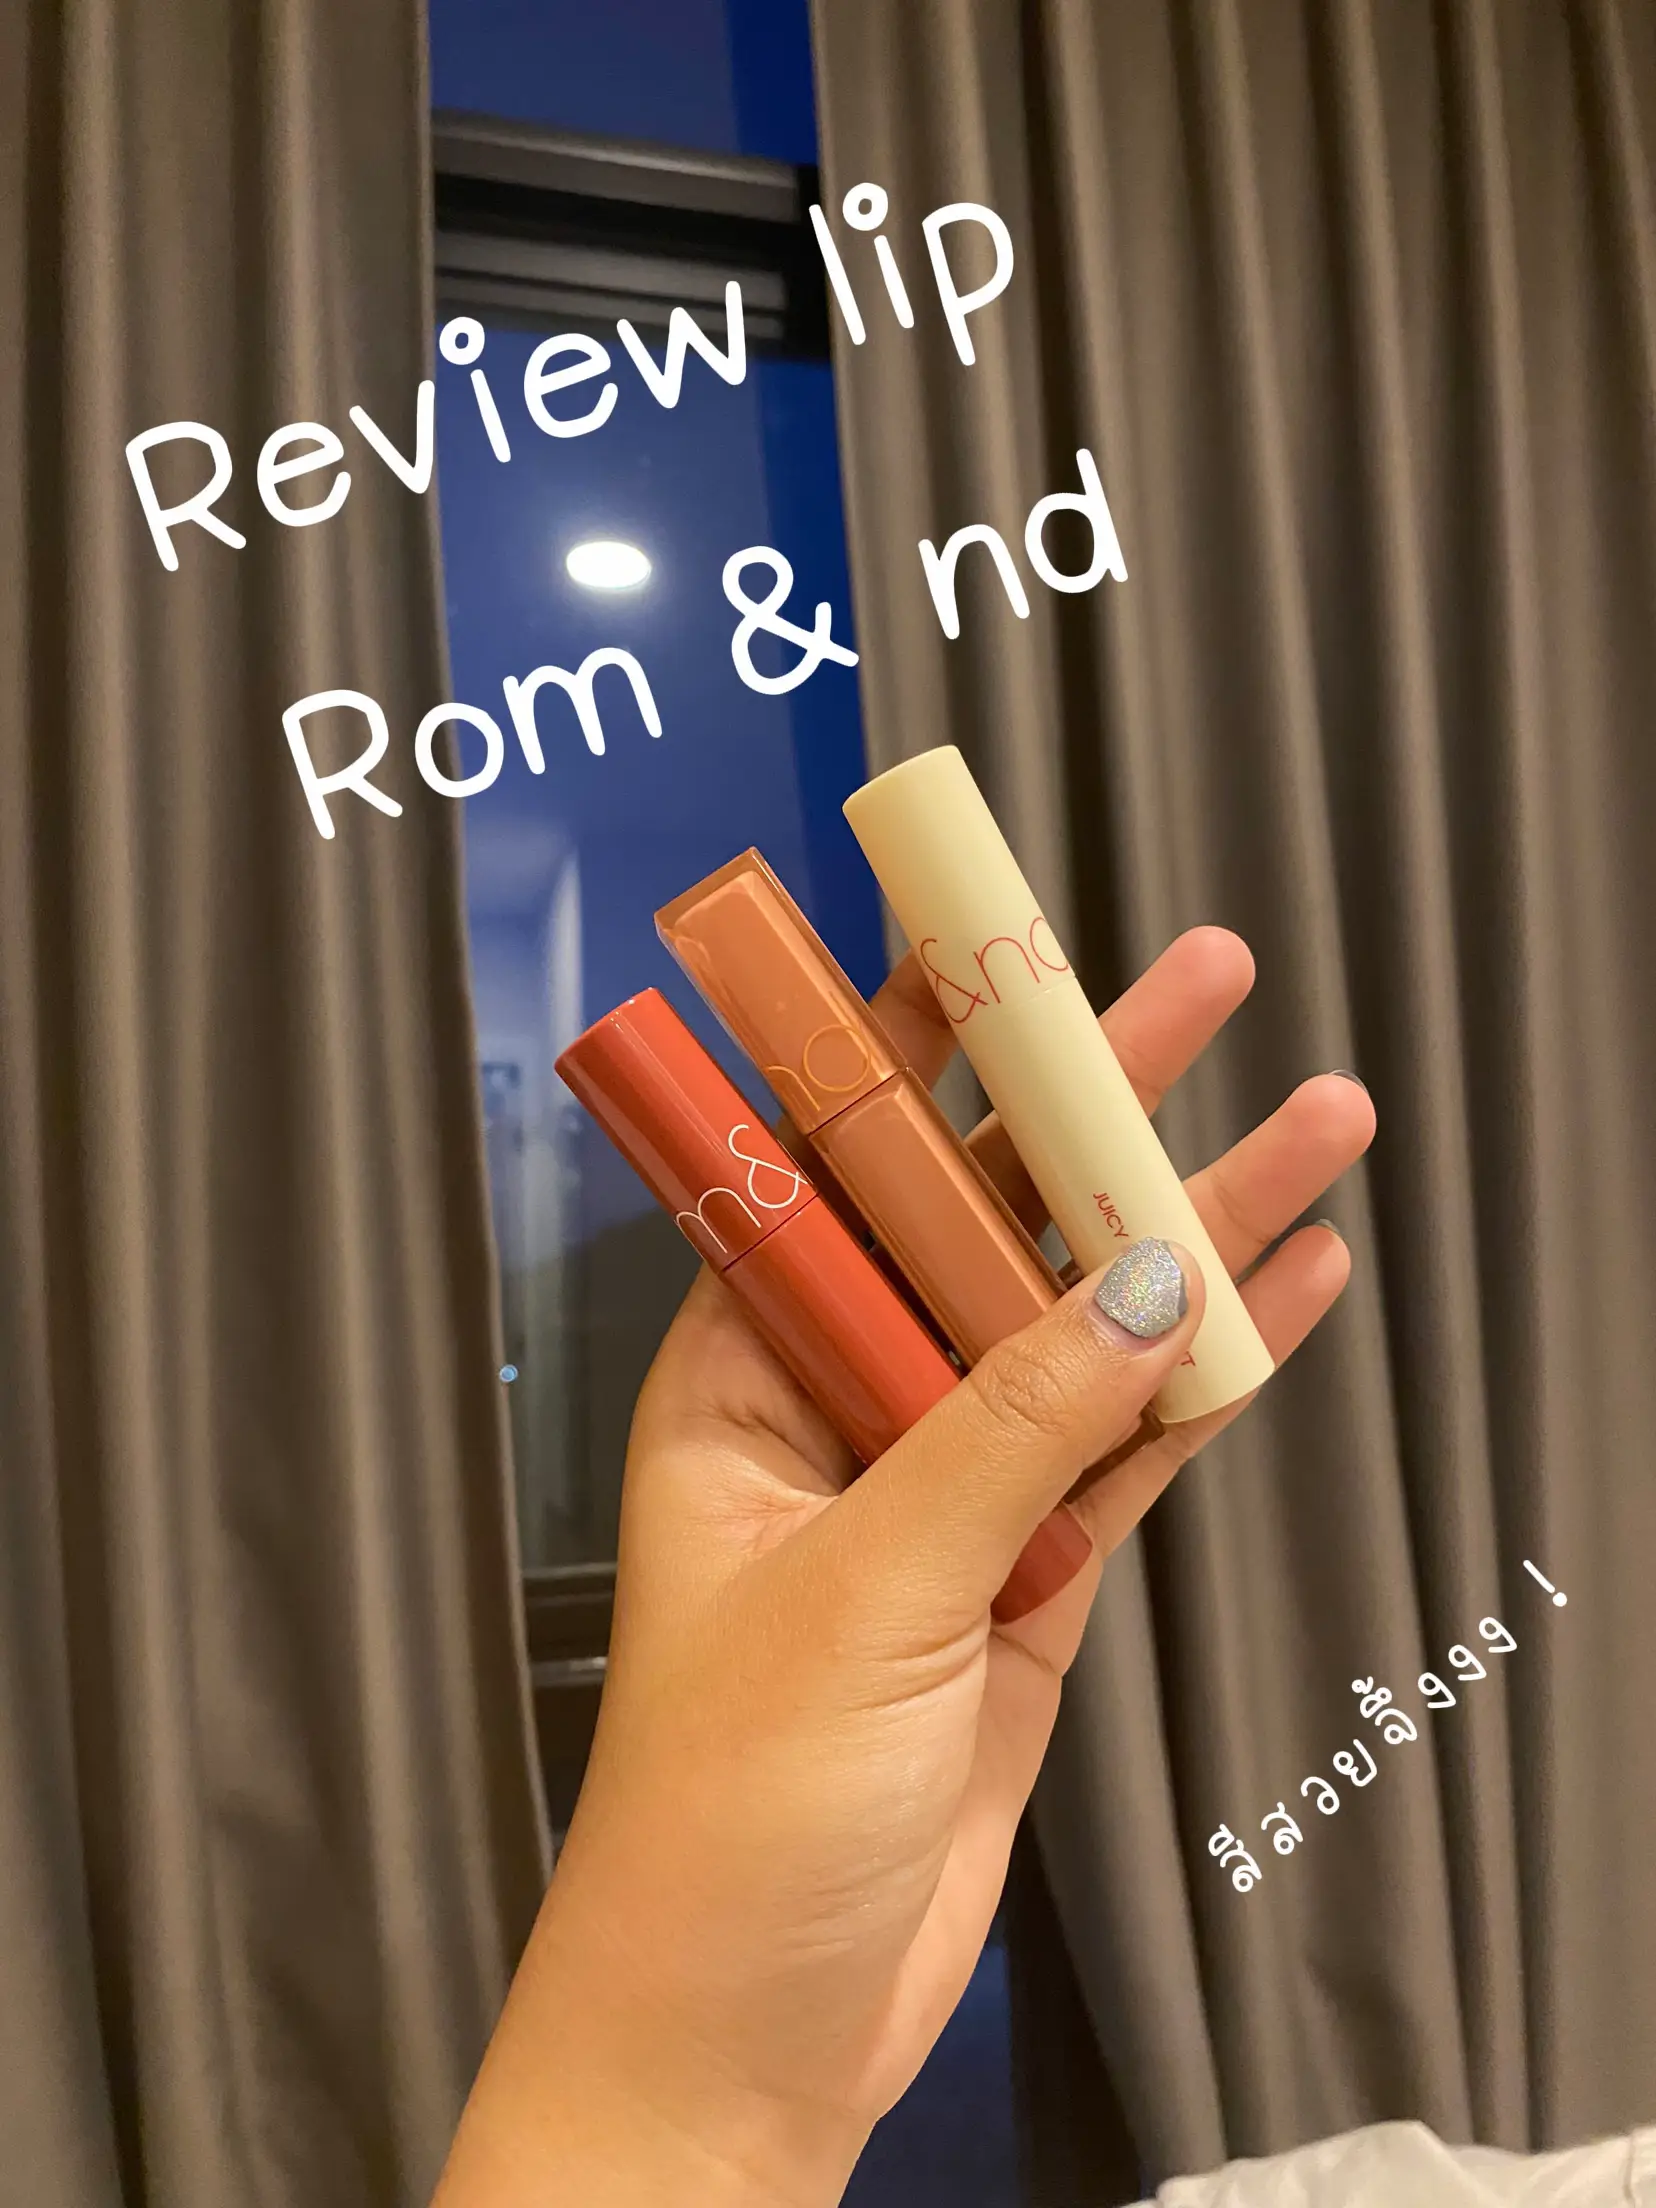 Rom & nd Lip Review 💄💋, Gallery posted by Aomnatcha